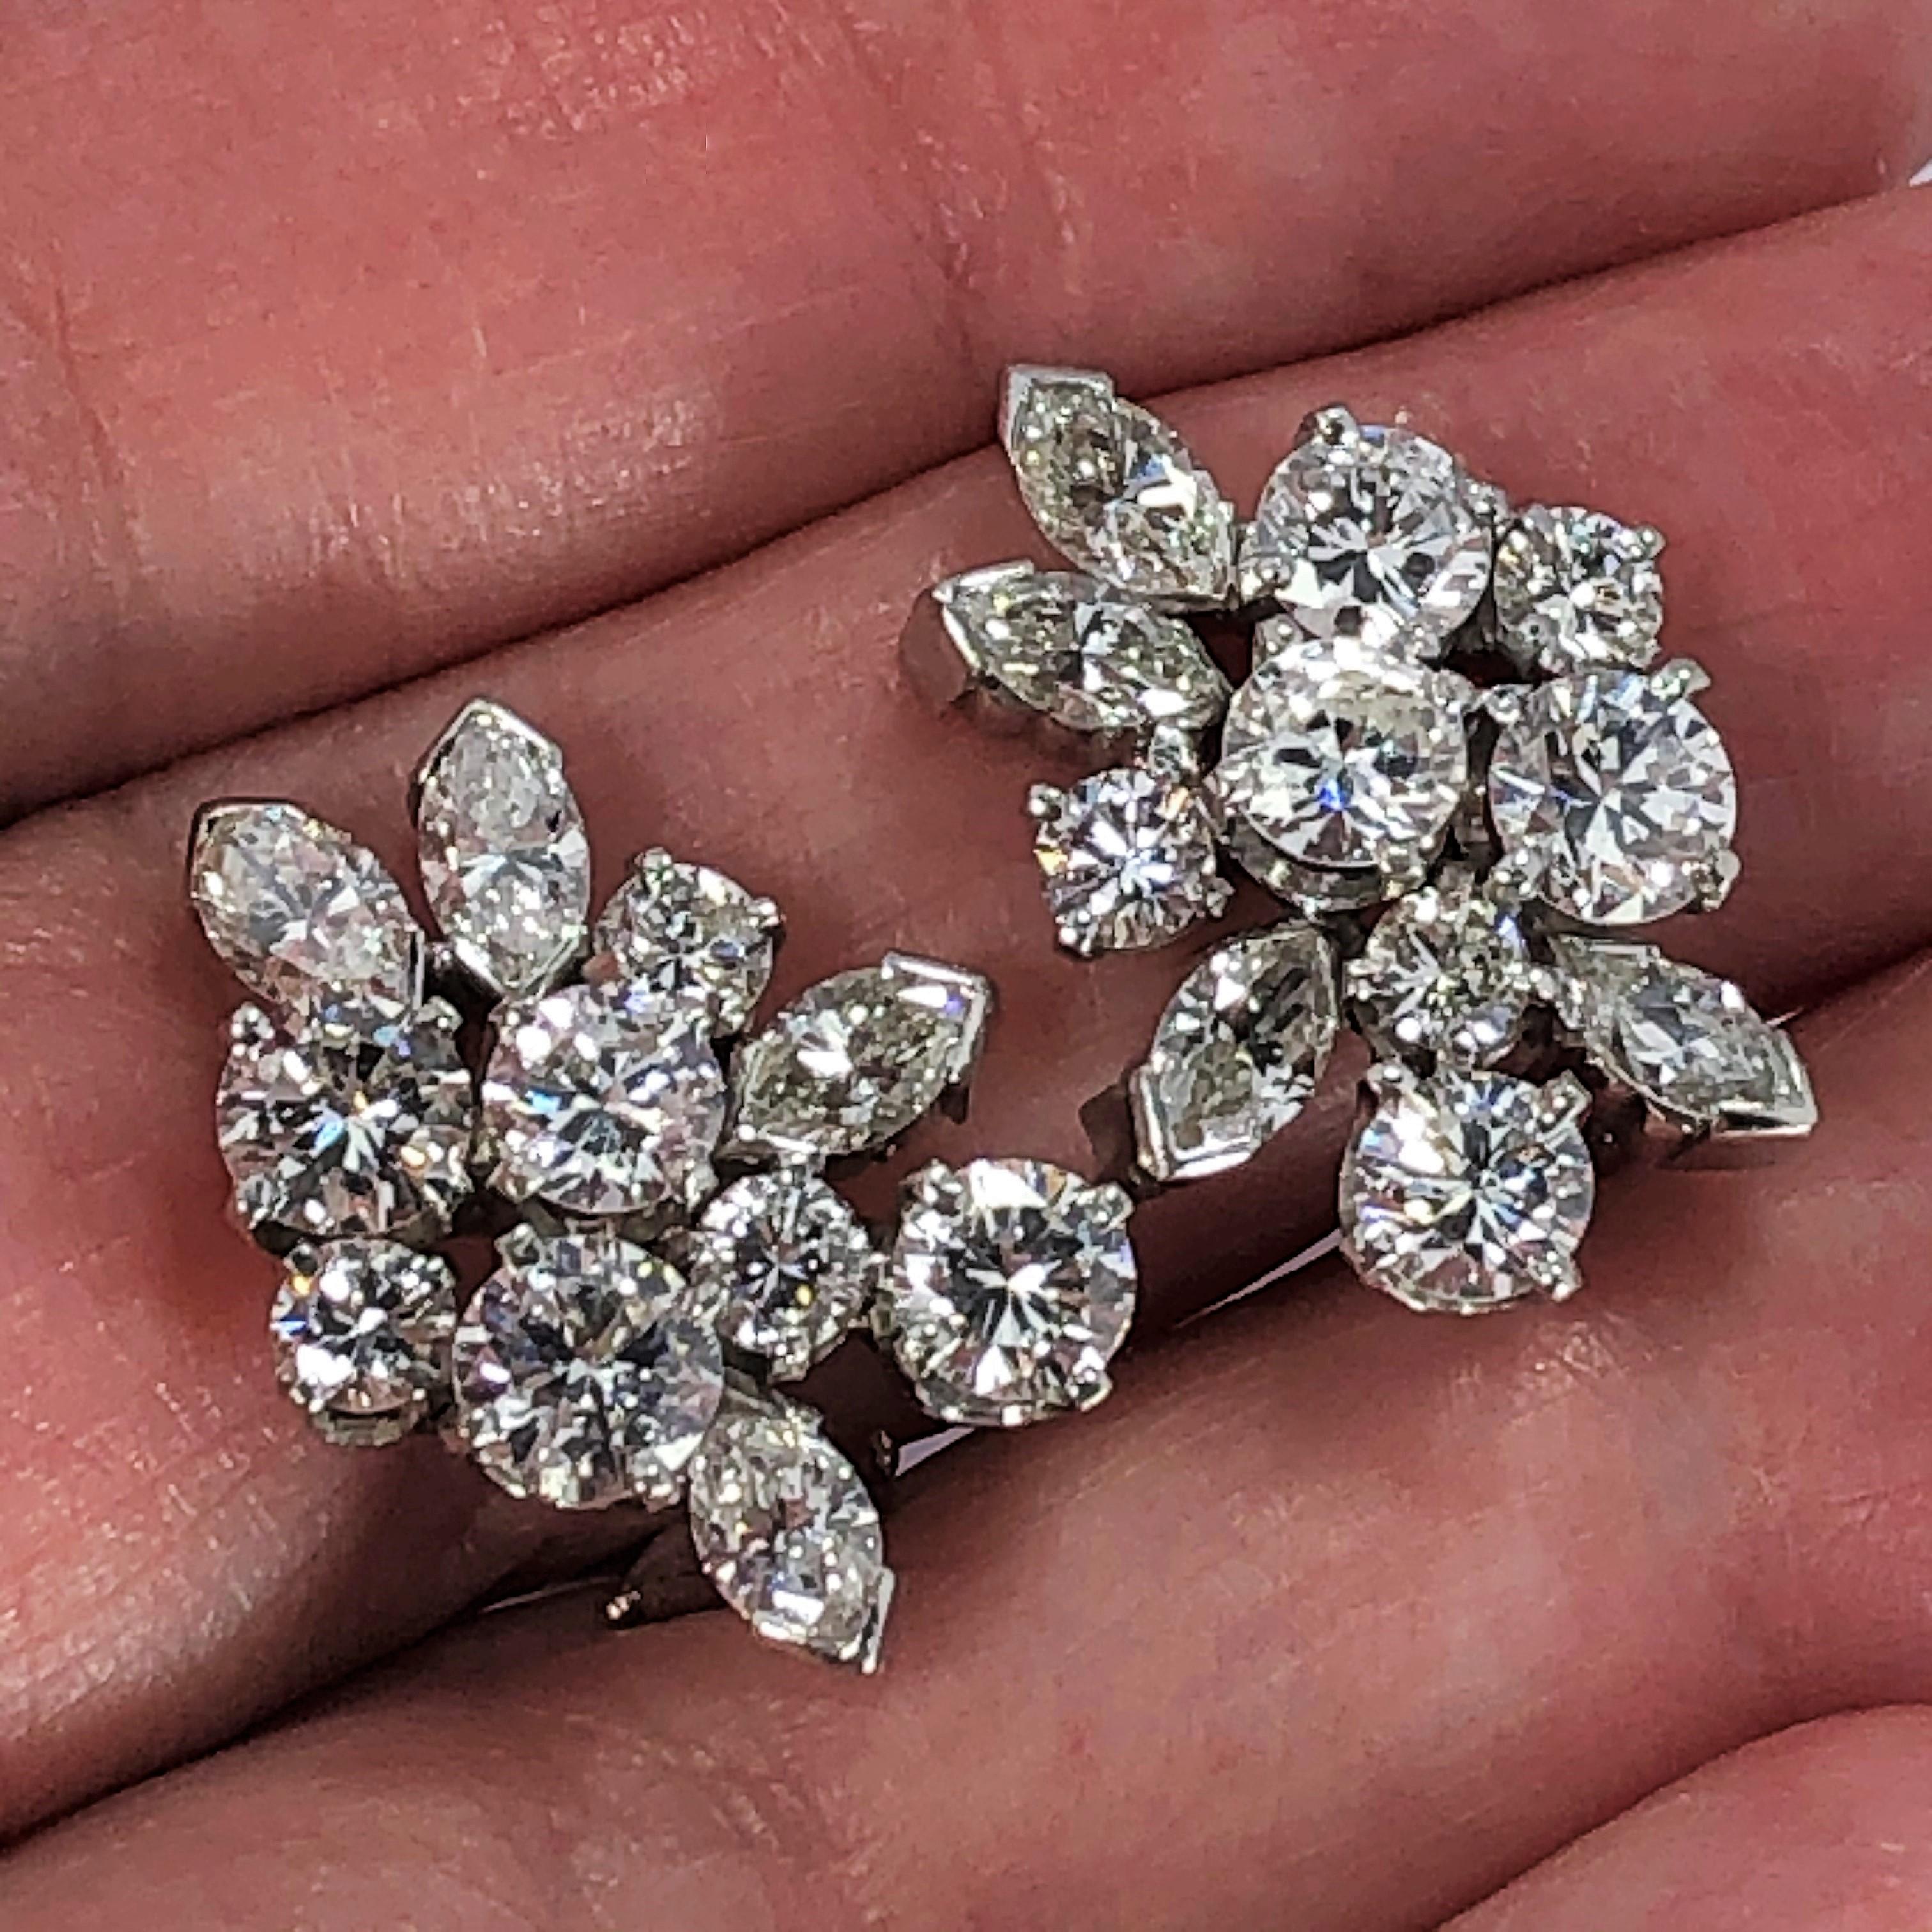 These elegant,  Mid-Century diamond cluster earrings are ideal for the lady who wears 
mid-size earrings. Set in platinum with 14 round brilliant cut diamonds and with 8 
marquise cut diamonds. The total approximate diamond weight is 4.10CT of